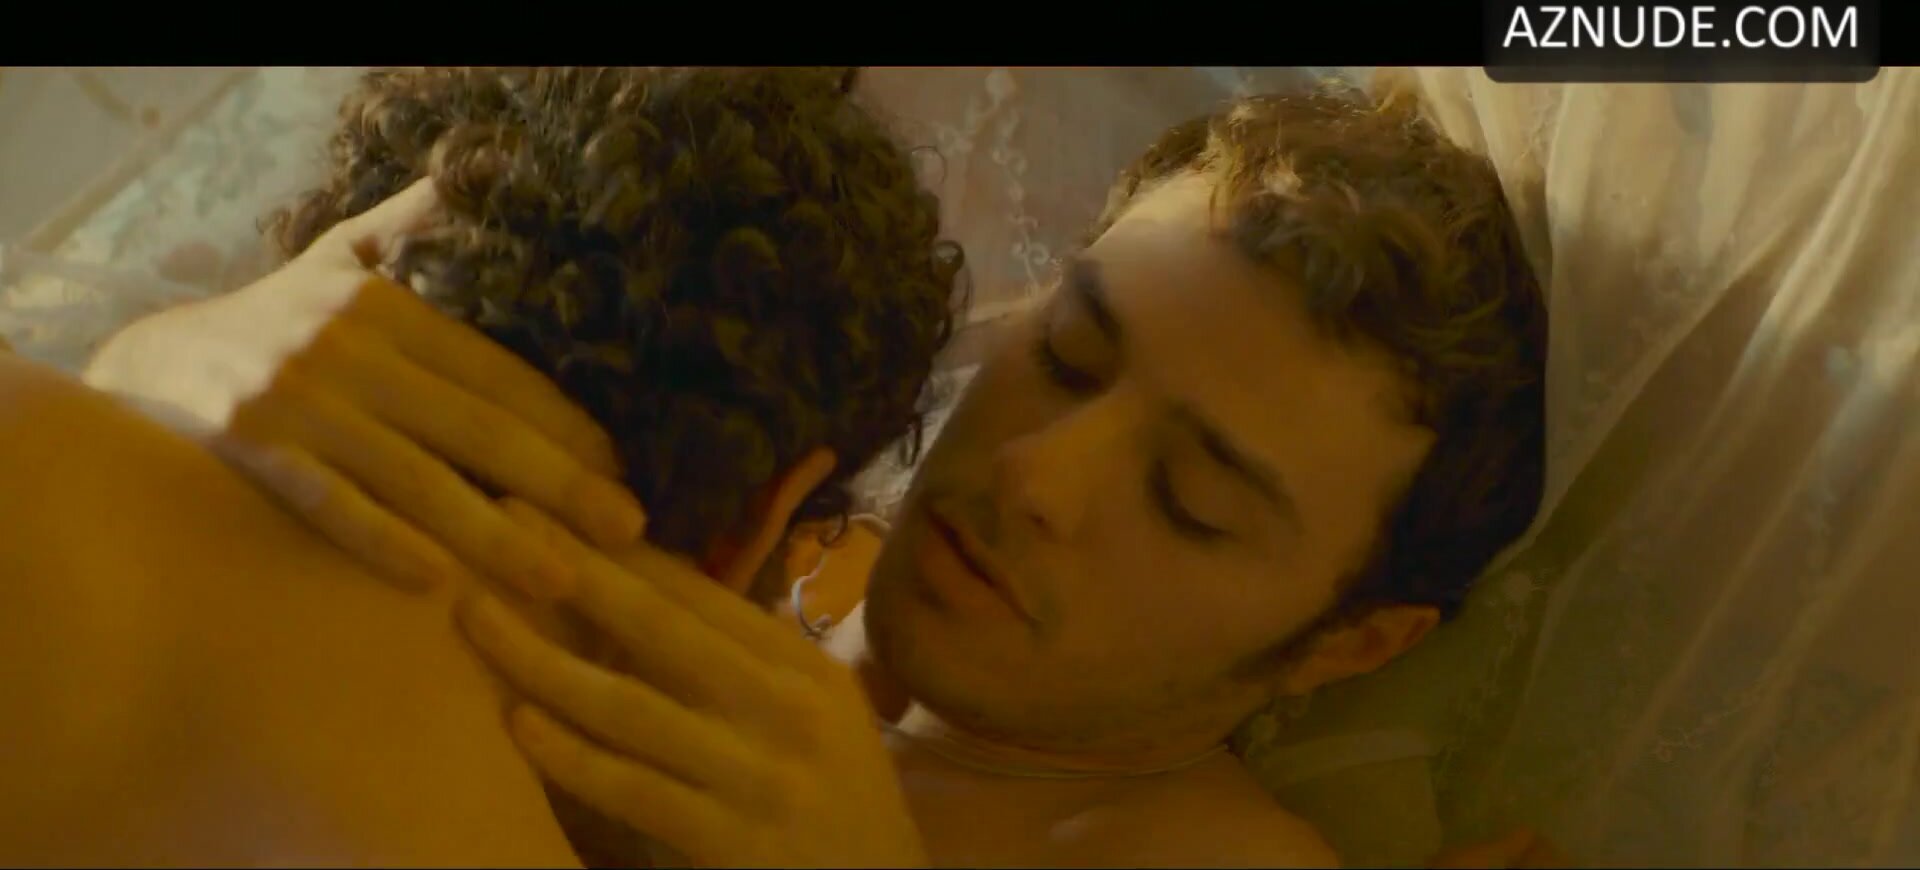 KISSING LEADS TO HOT GAY SEX